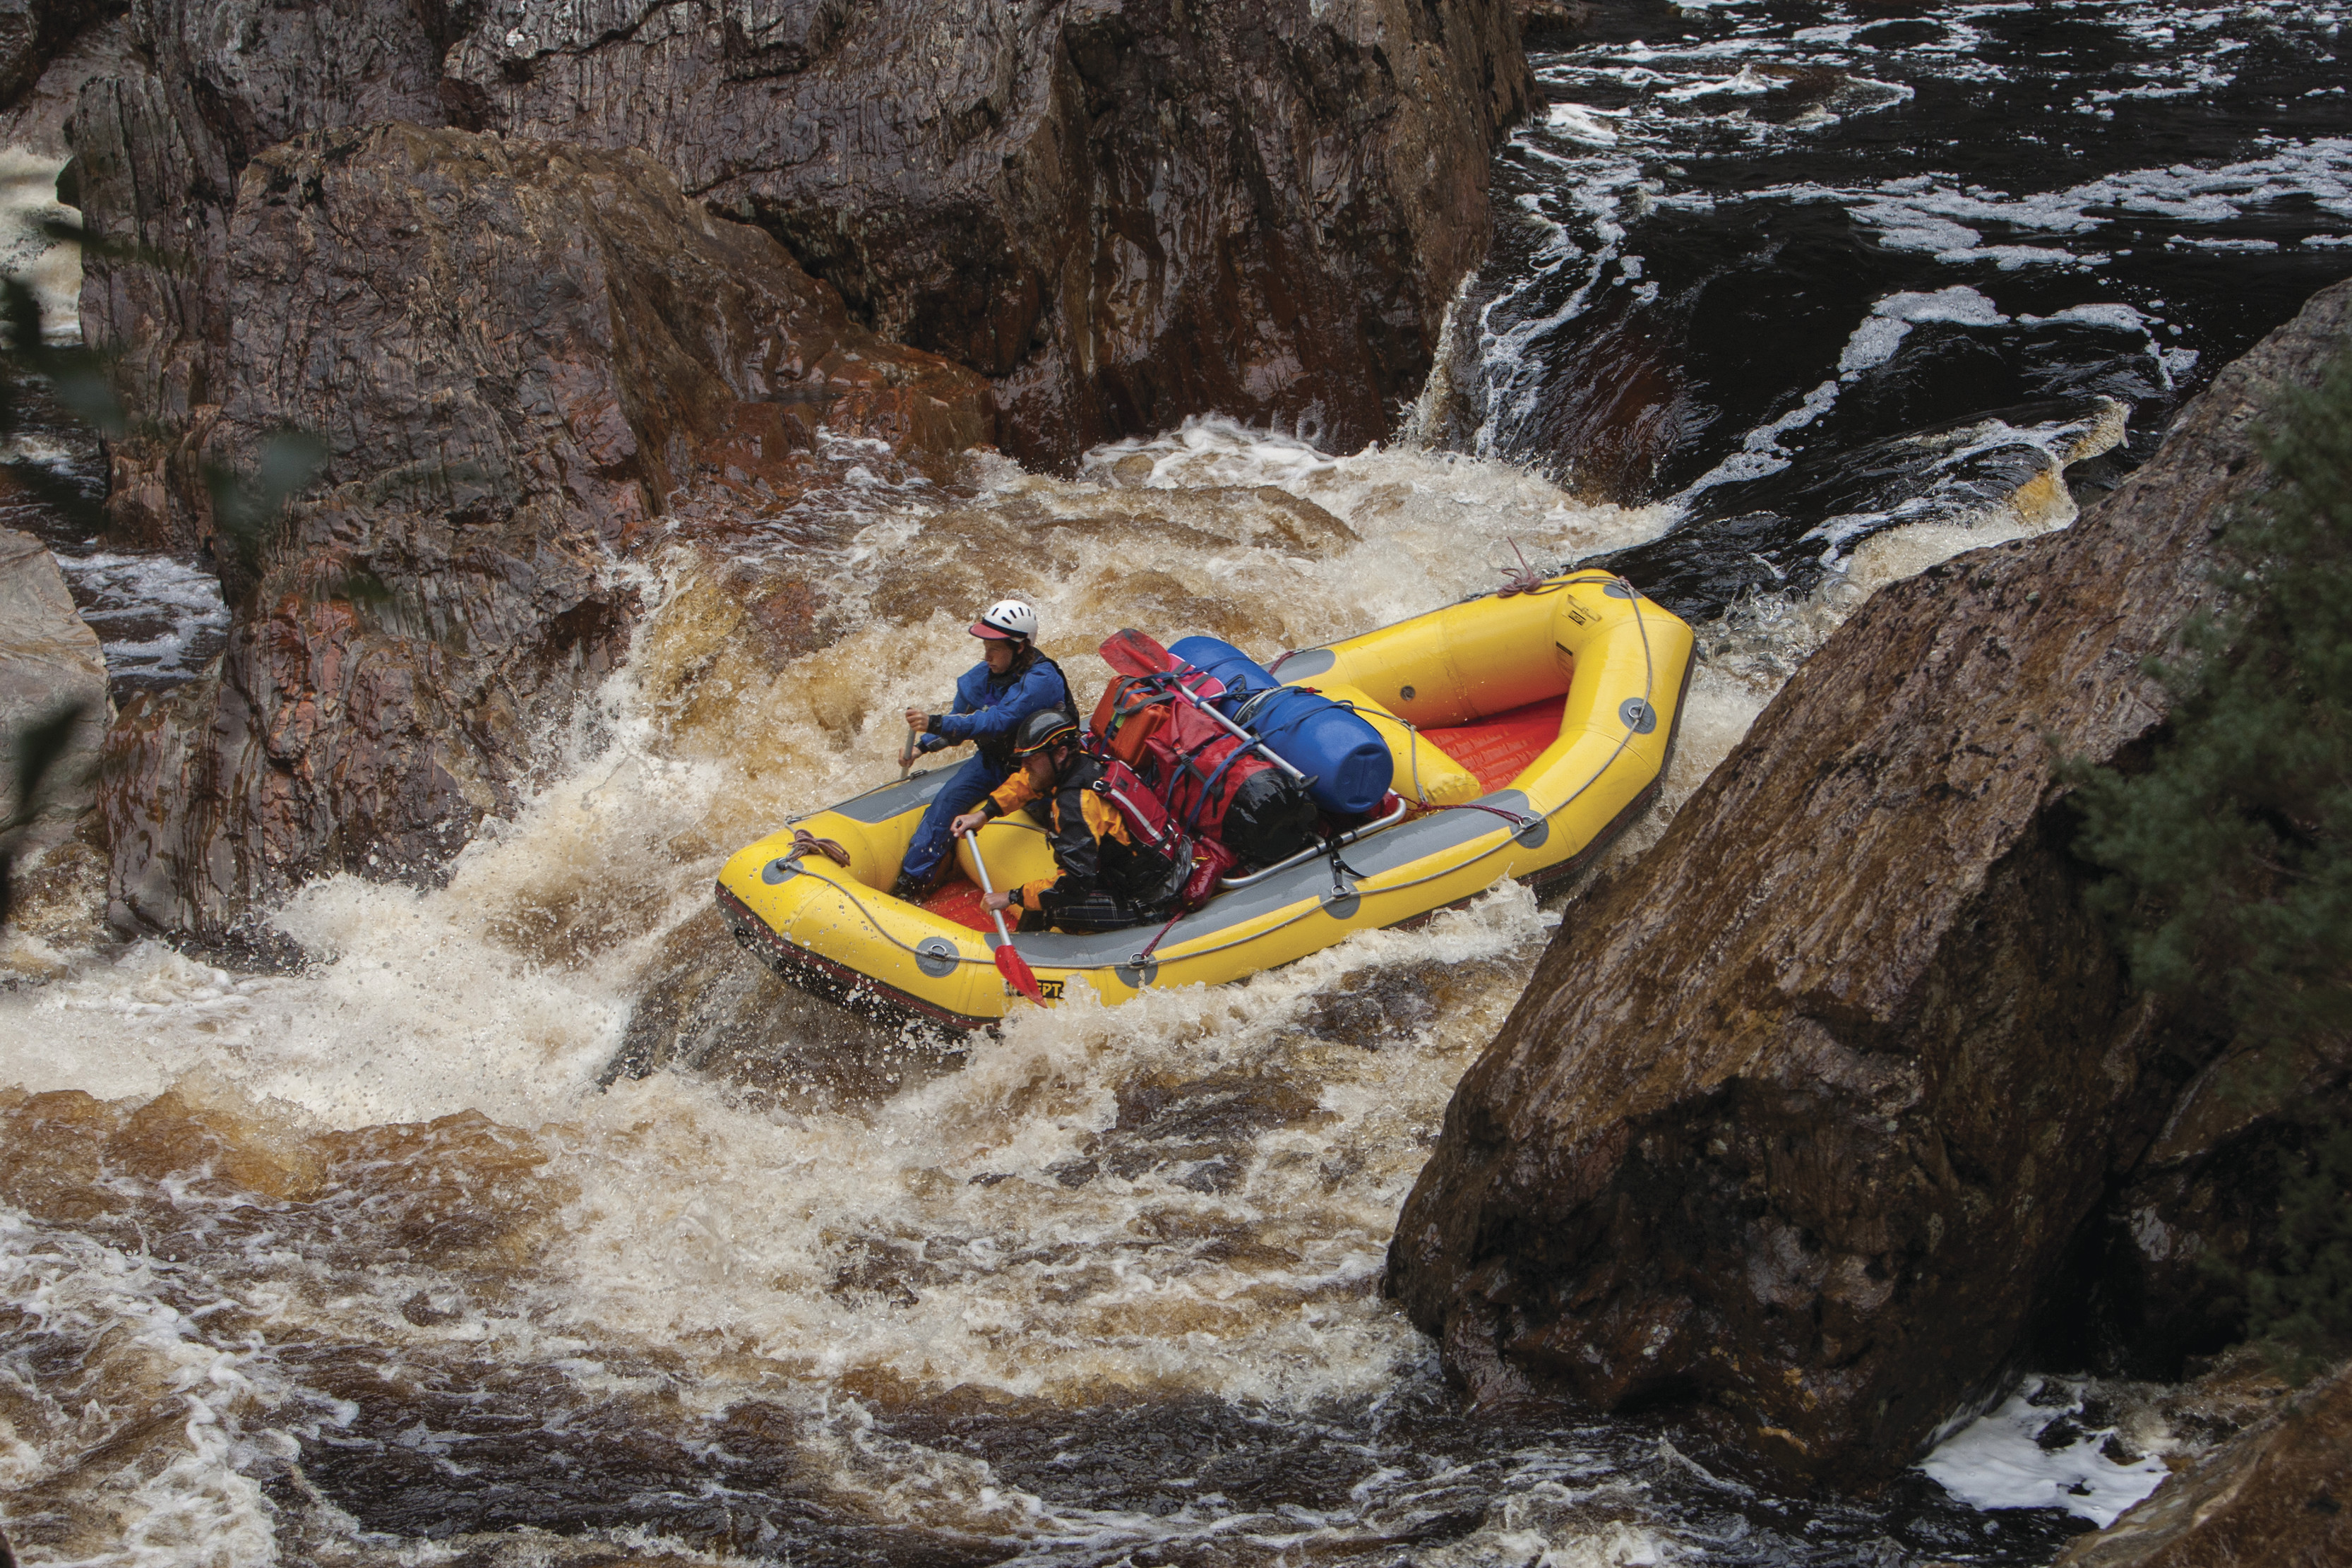 Intense image of two people white water rafting in rough waters on the Franklin River.